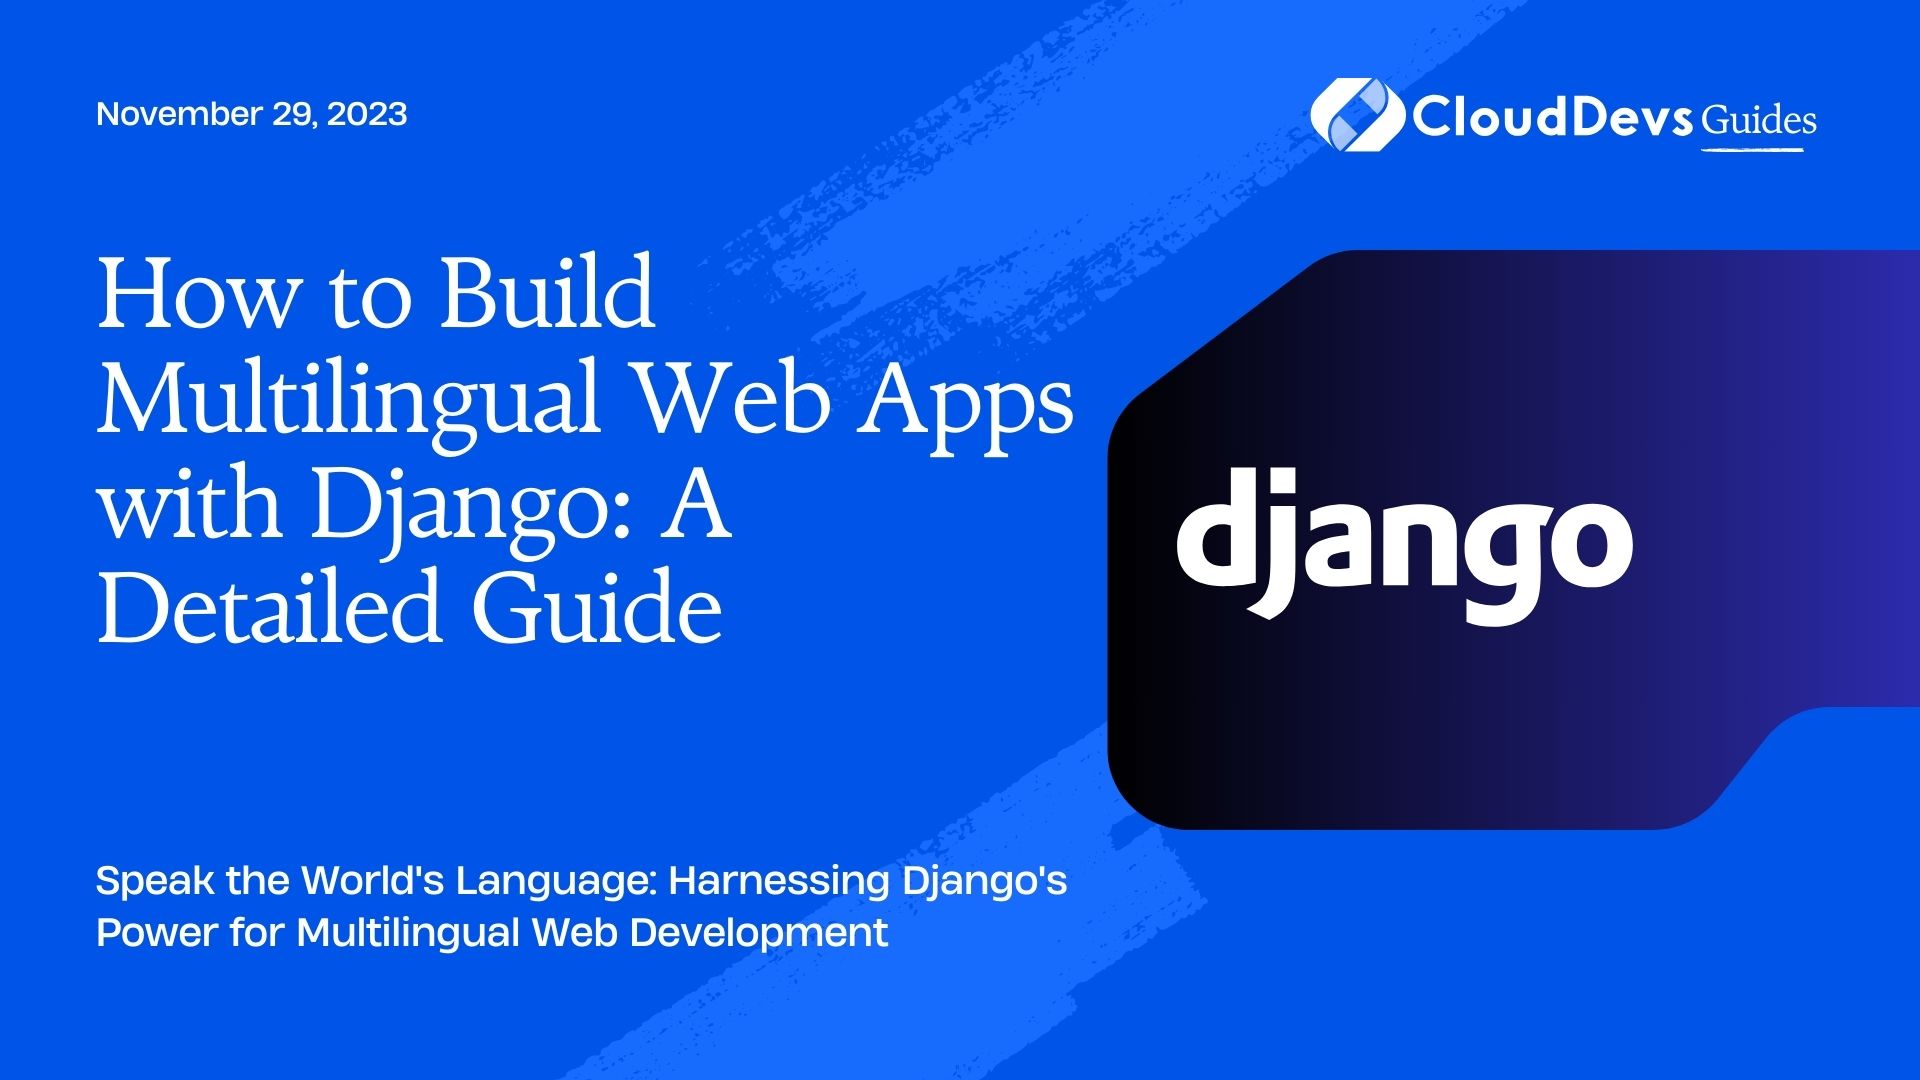 How to Build Multilingual Web Apps with Django: A Detailed Guide